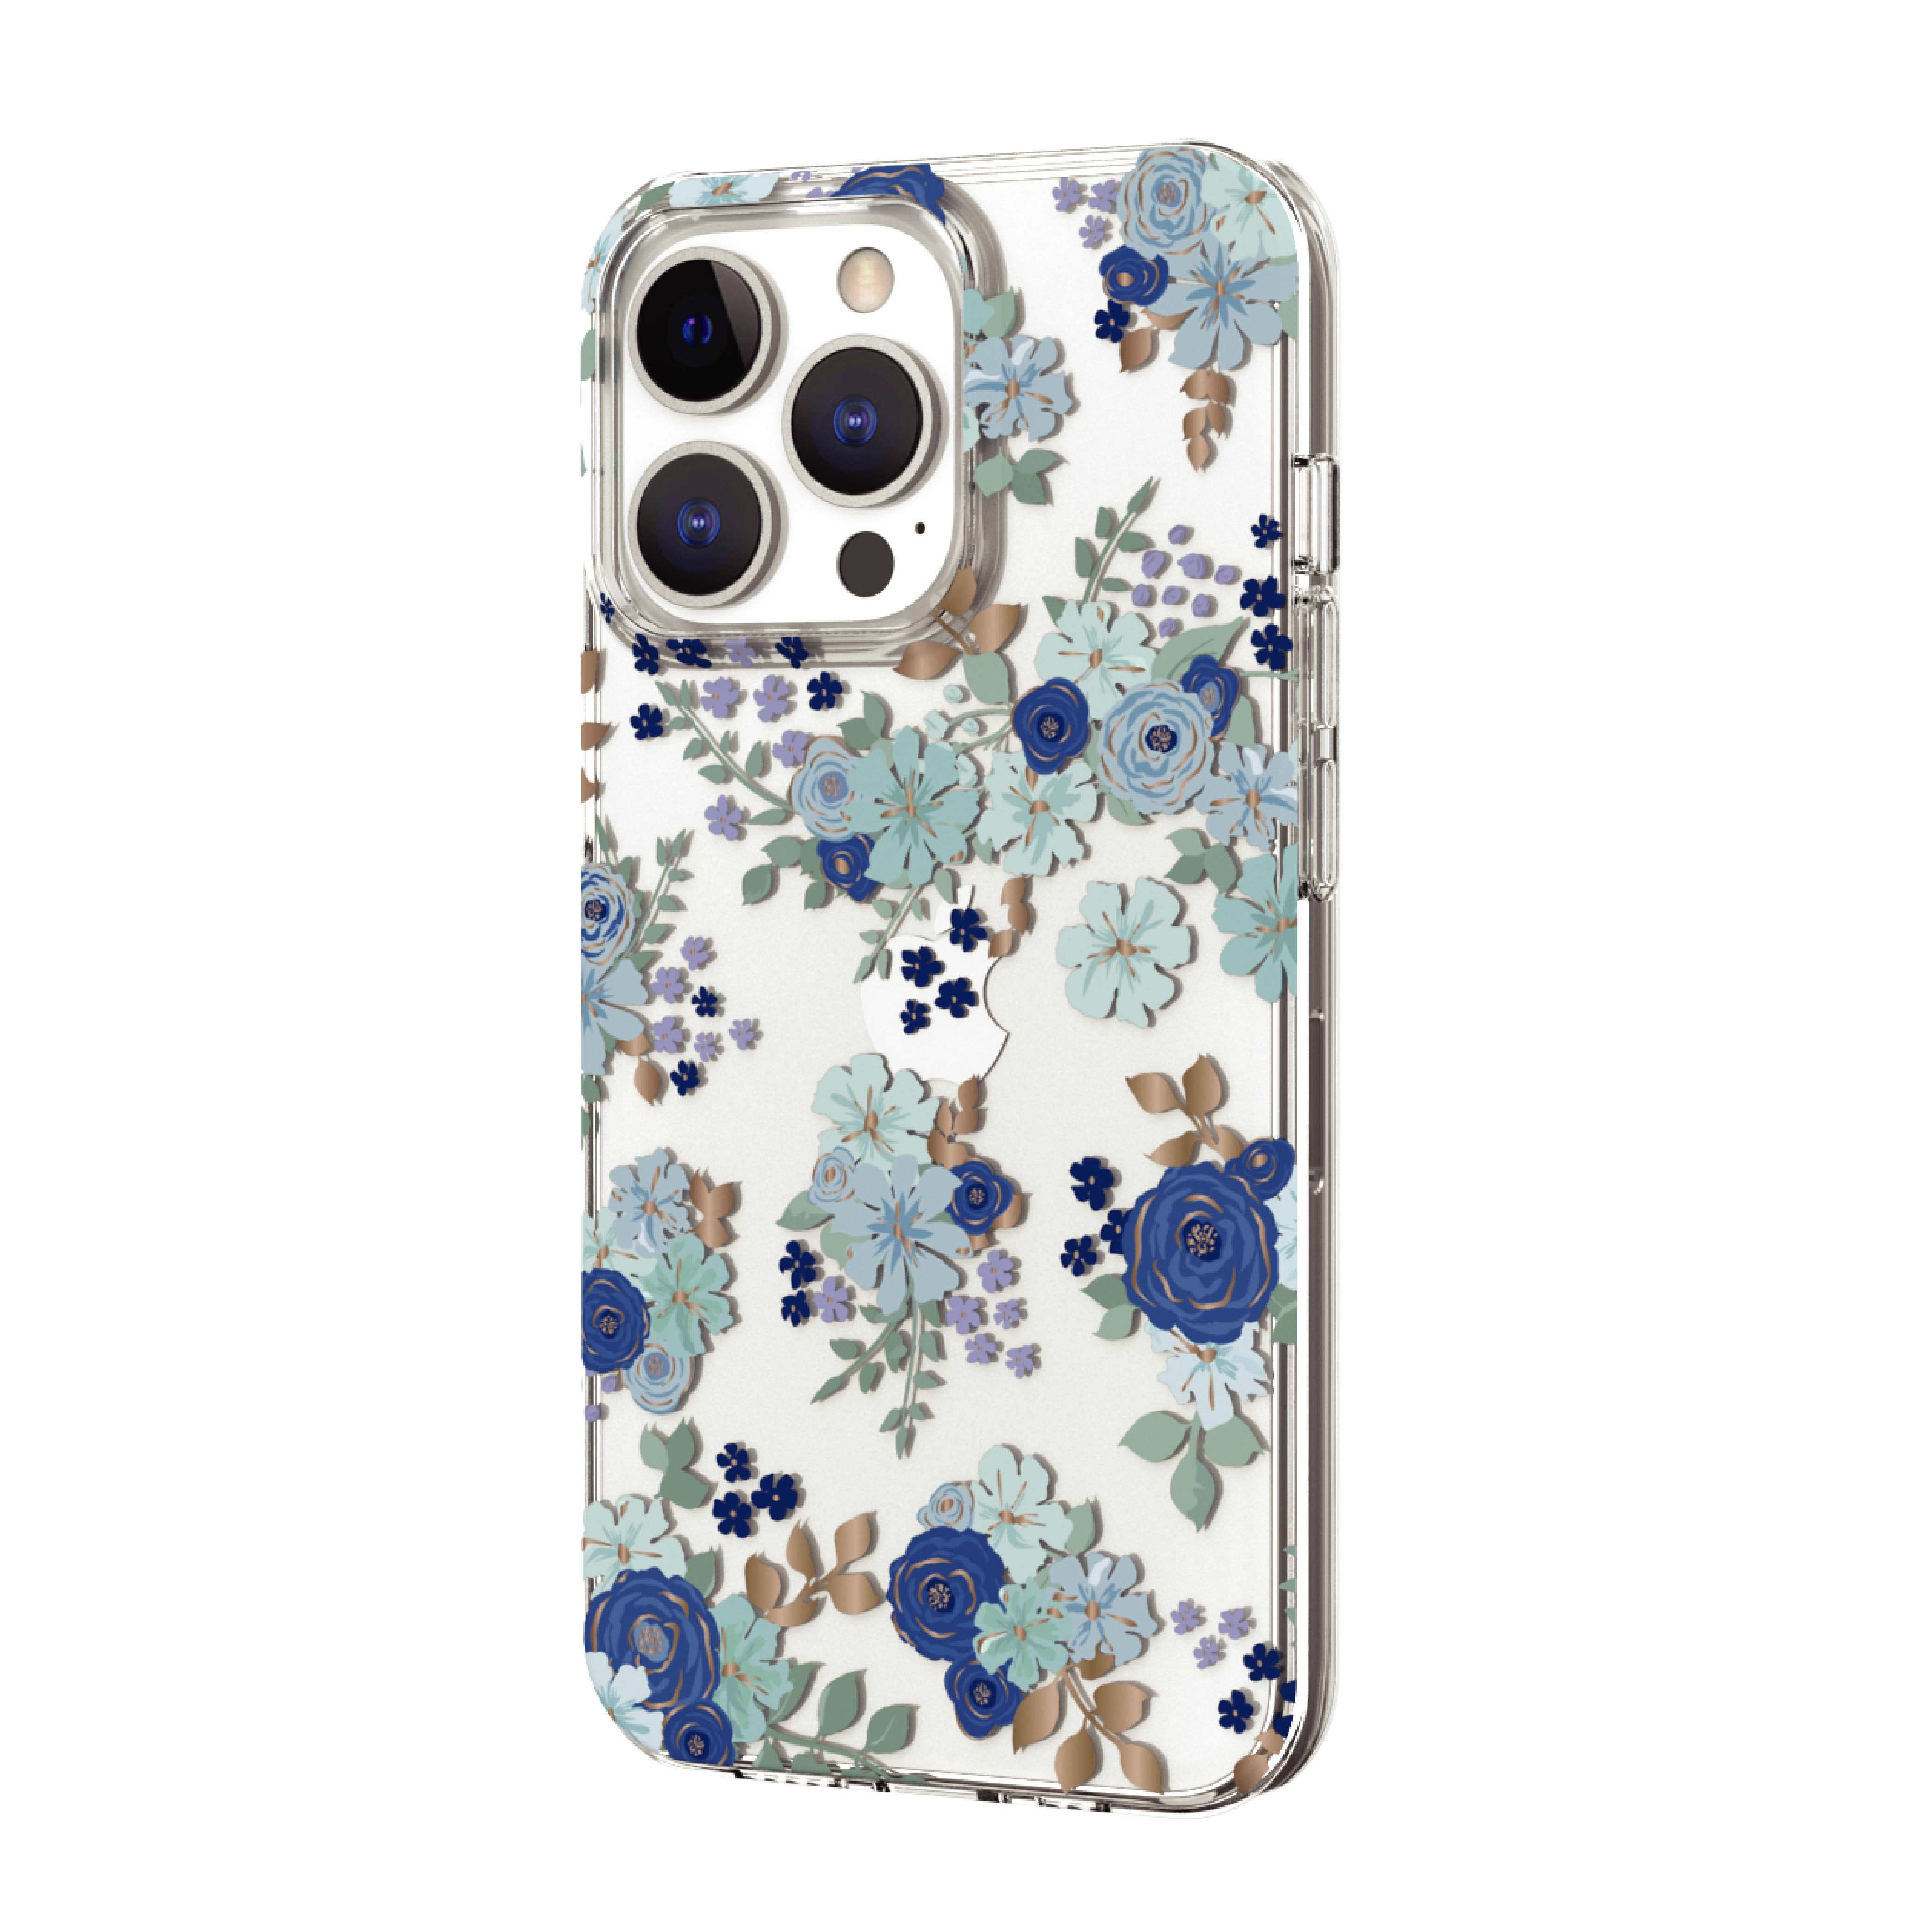 onn. Blue Floral Phone Case for iPhone 13 Pro Max / iPhone 12 Pro Max